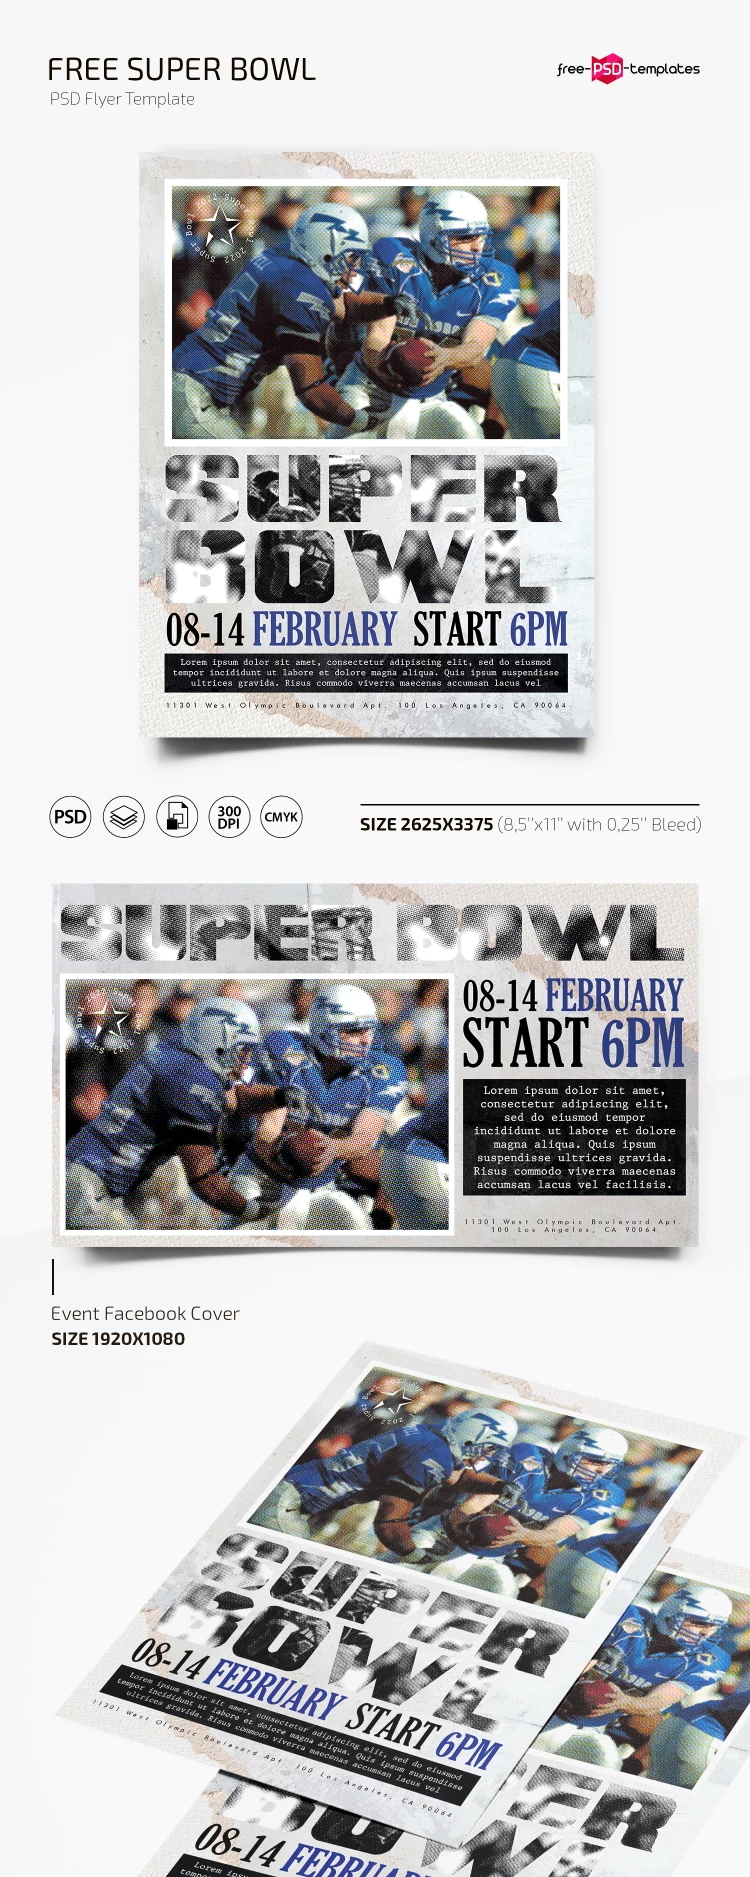 Free Super Bowl Flyer PSD Template